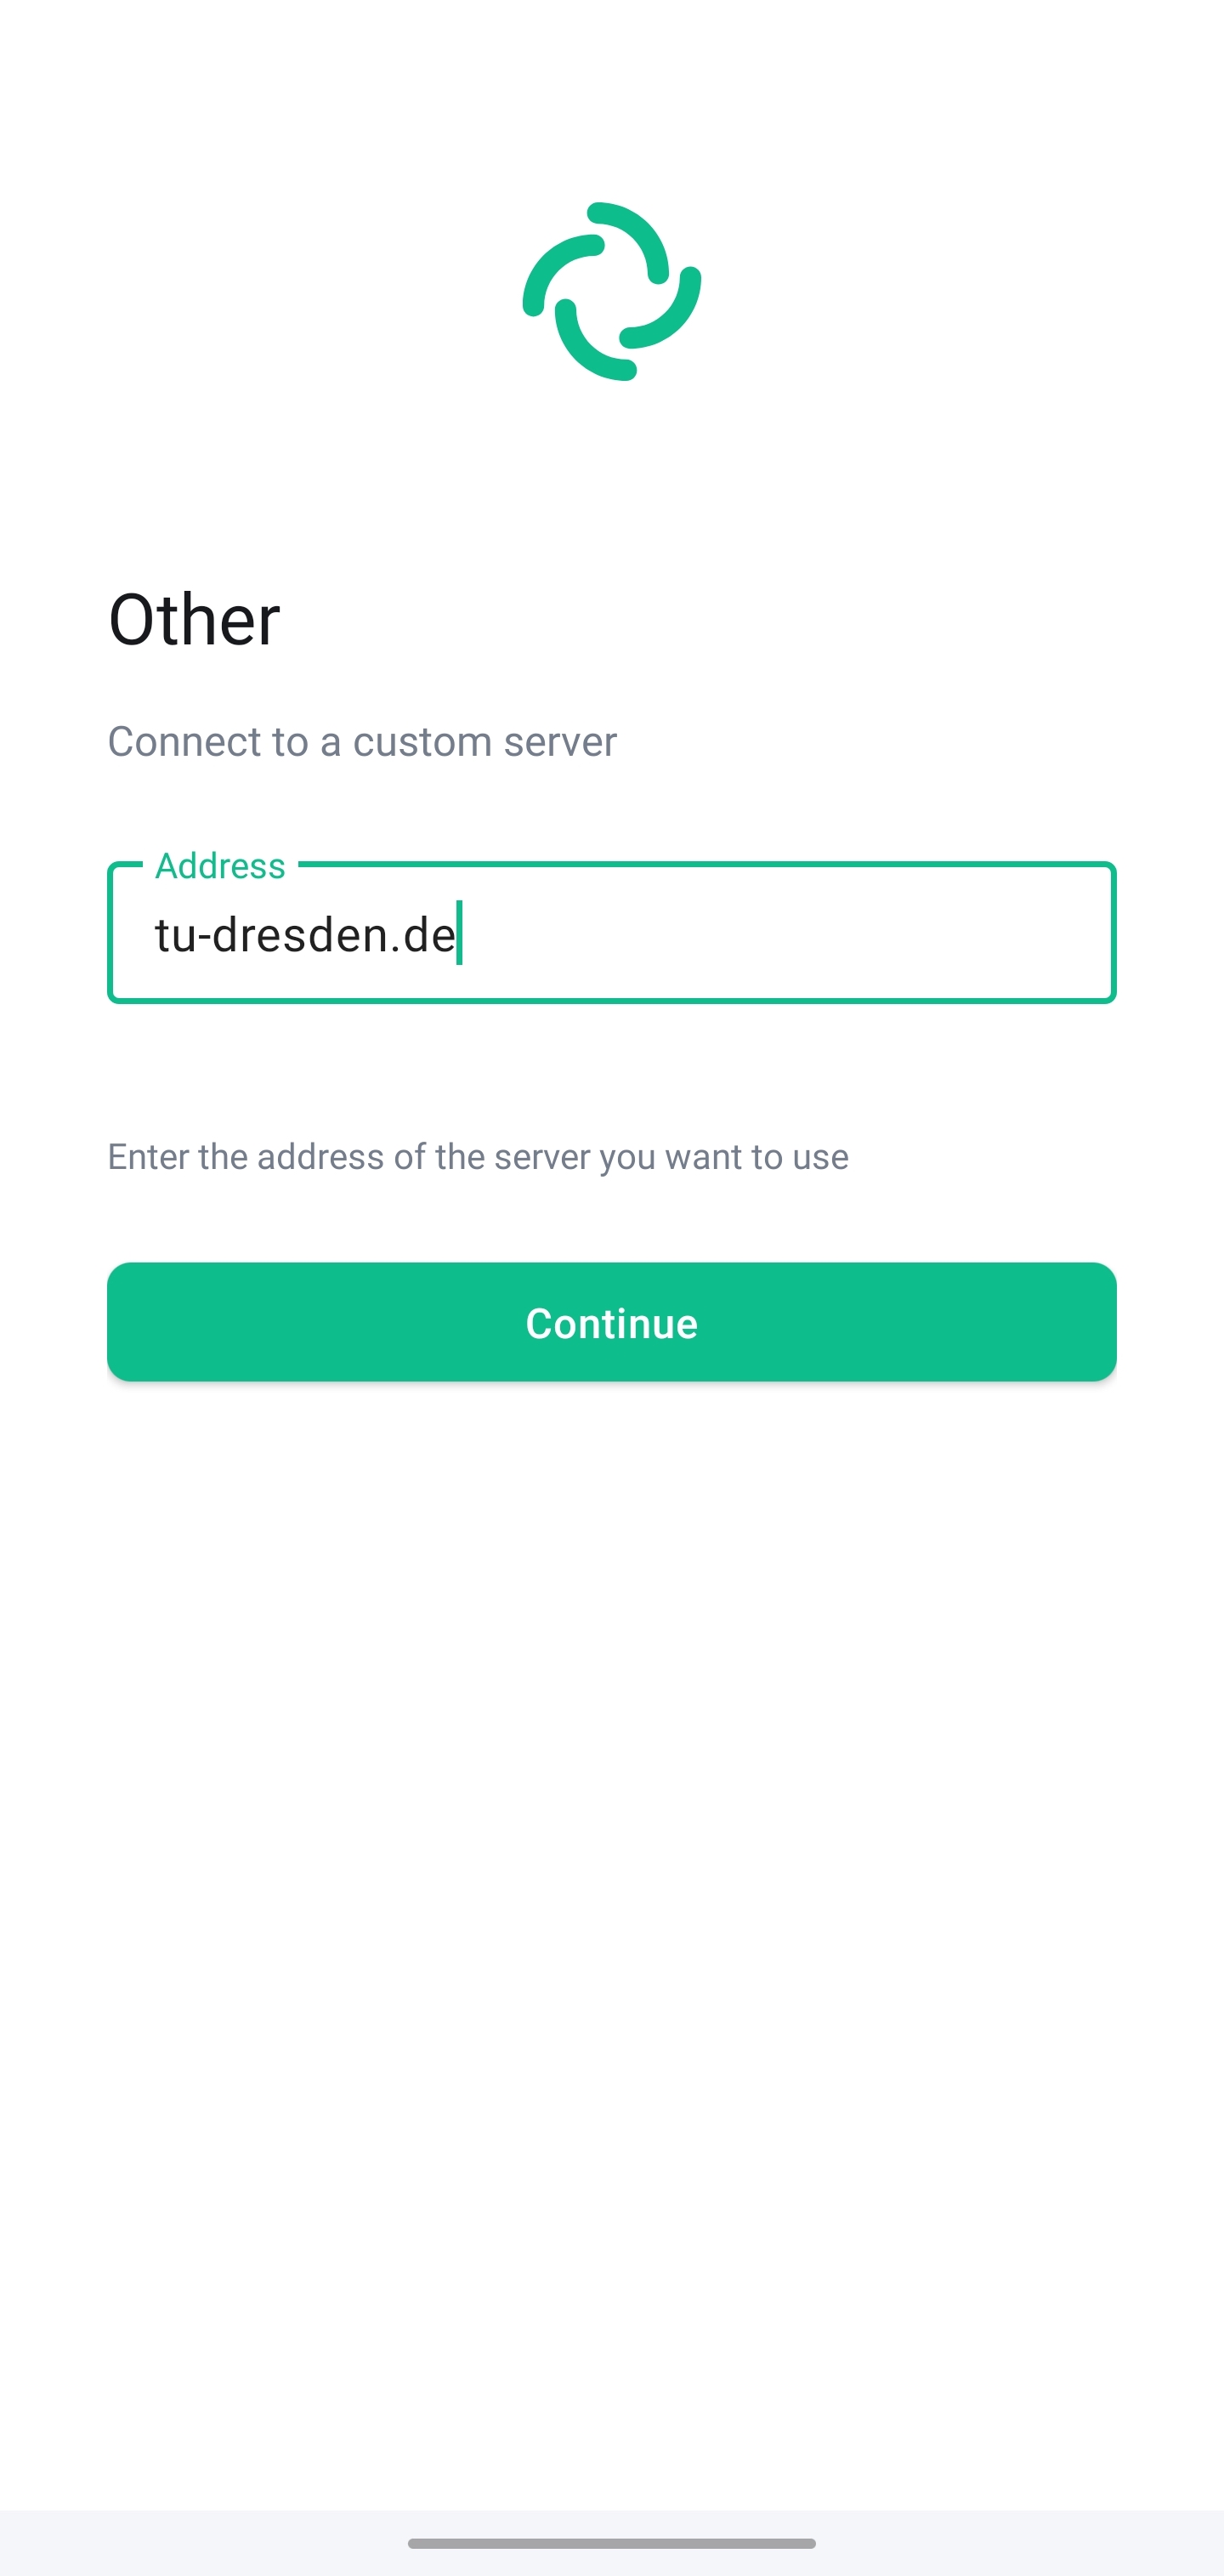 “Other” screen to connect to custom server. The Address text box requires the server address to be entered, and below it is the Continue button.